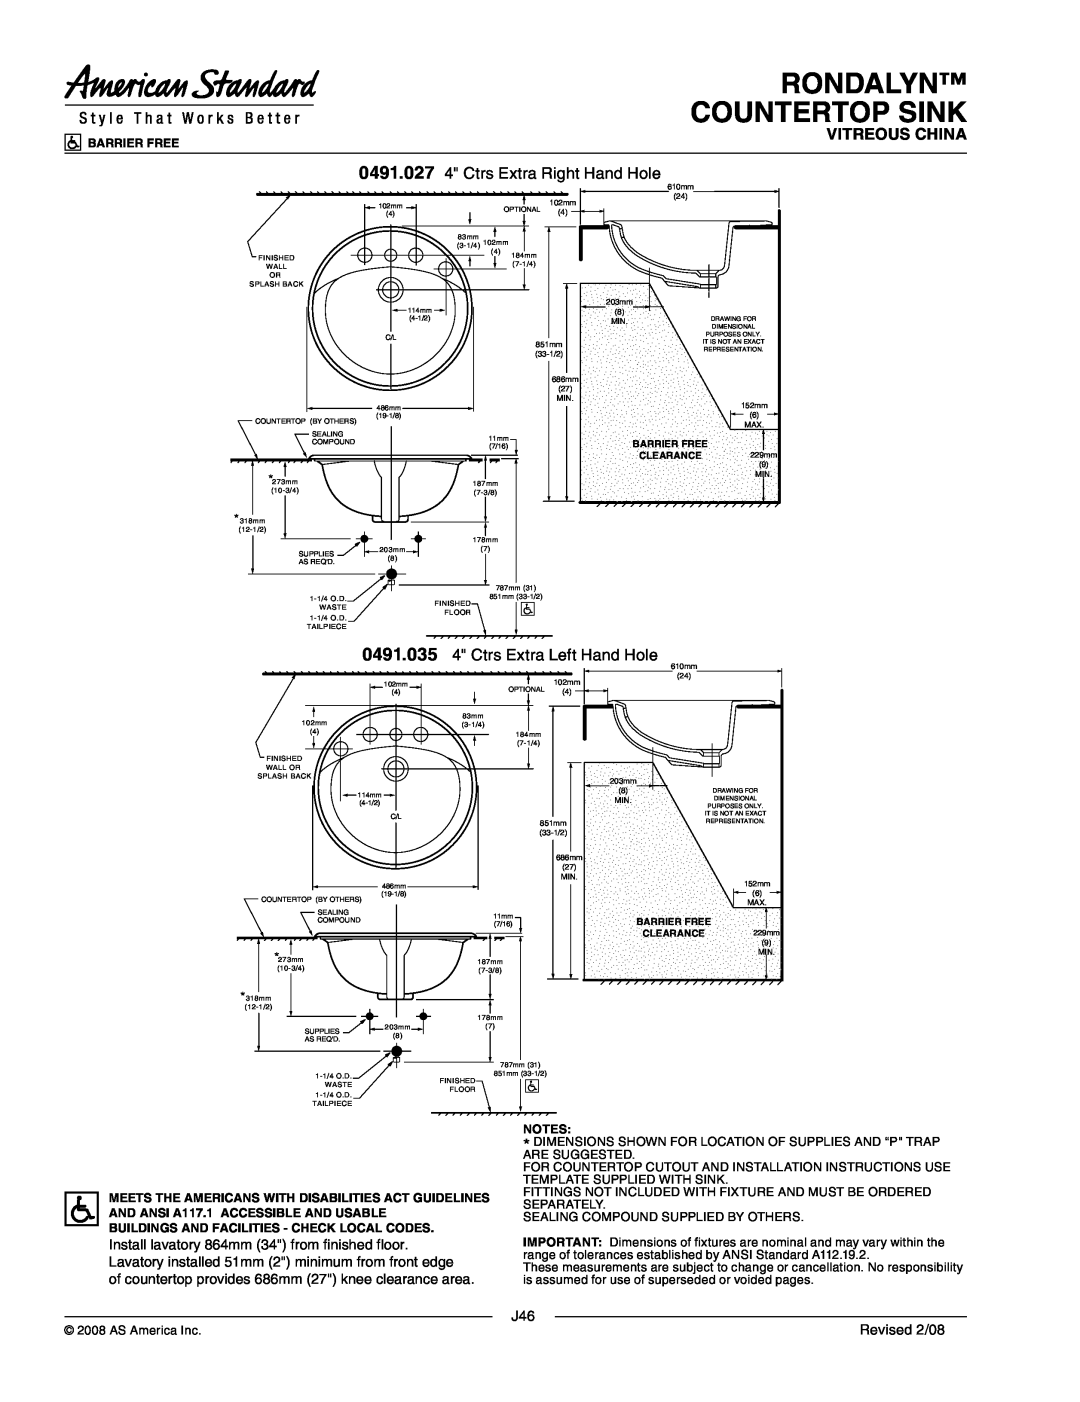 American Standard 0490.035 Rondalyn Countertop Sink, Vitreous China, 0491.027 4 Ctrs Extra Right Hand Hole, Revised 2/08 